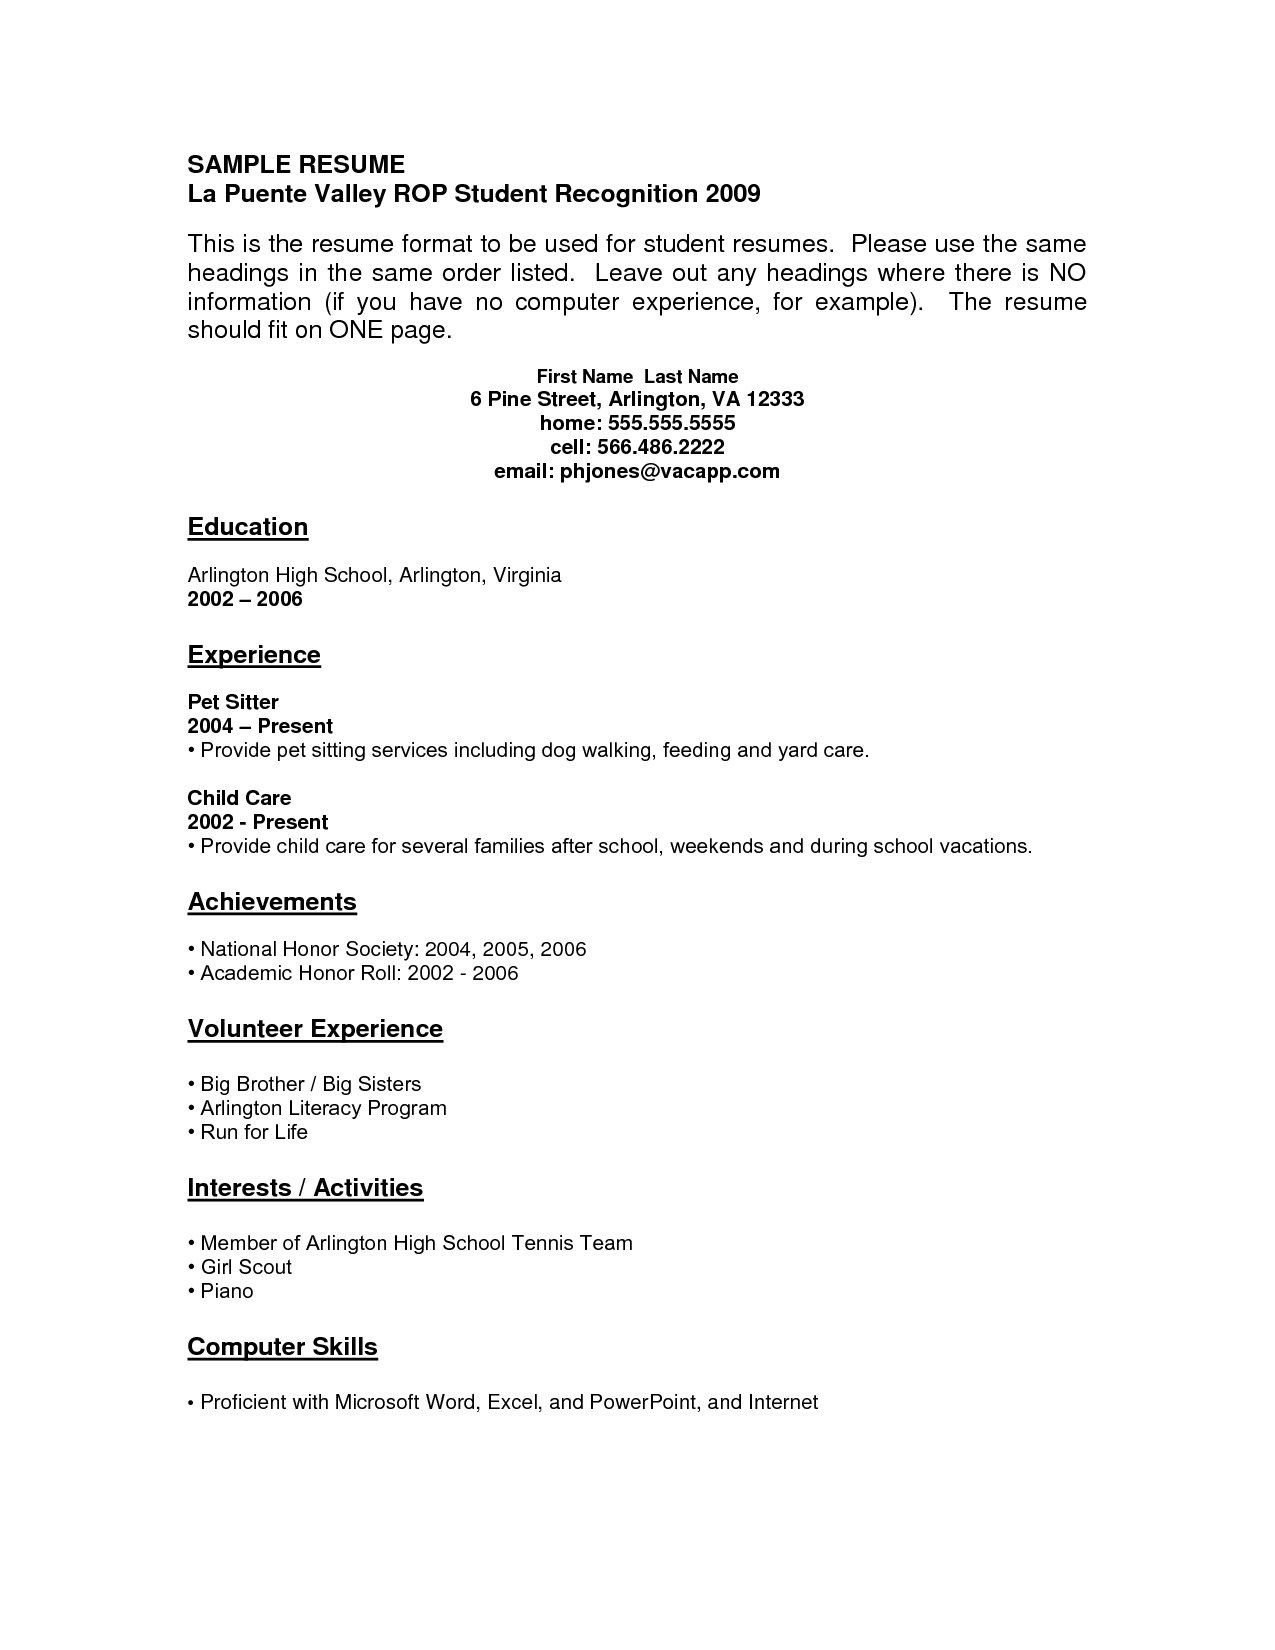 Resume Samples with Little Work History Resume Examples with No Job Experience – Resume Templates Resume …